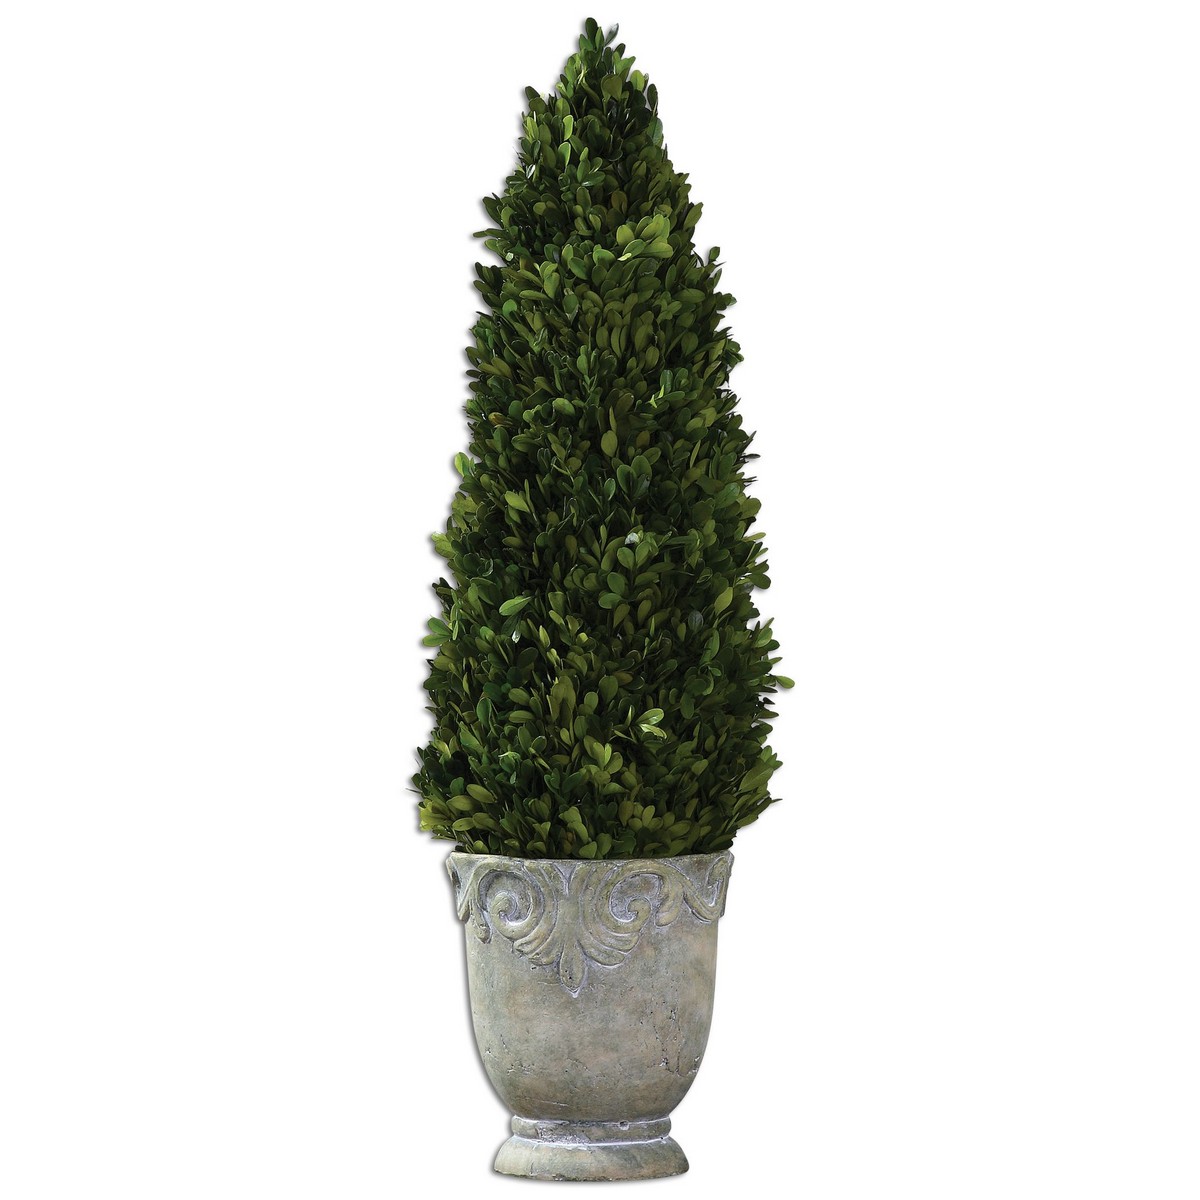 Uttermost Boxwood Cone Topiary